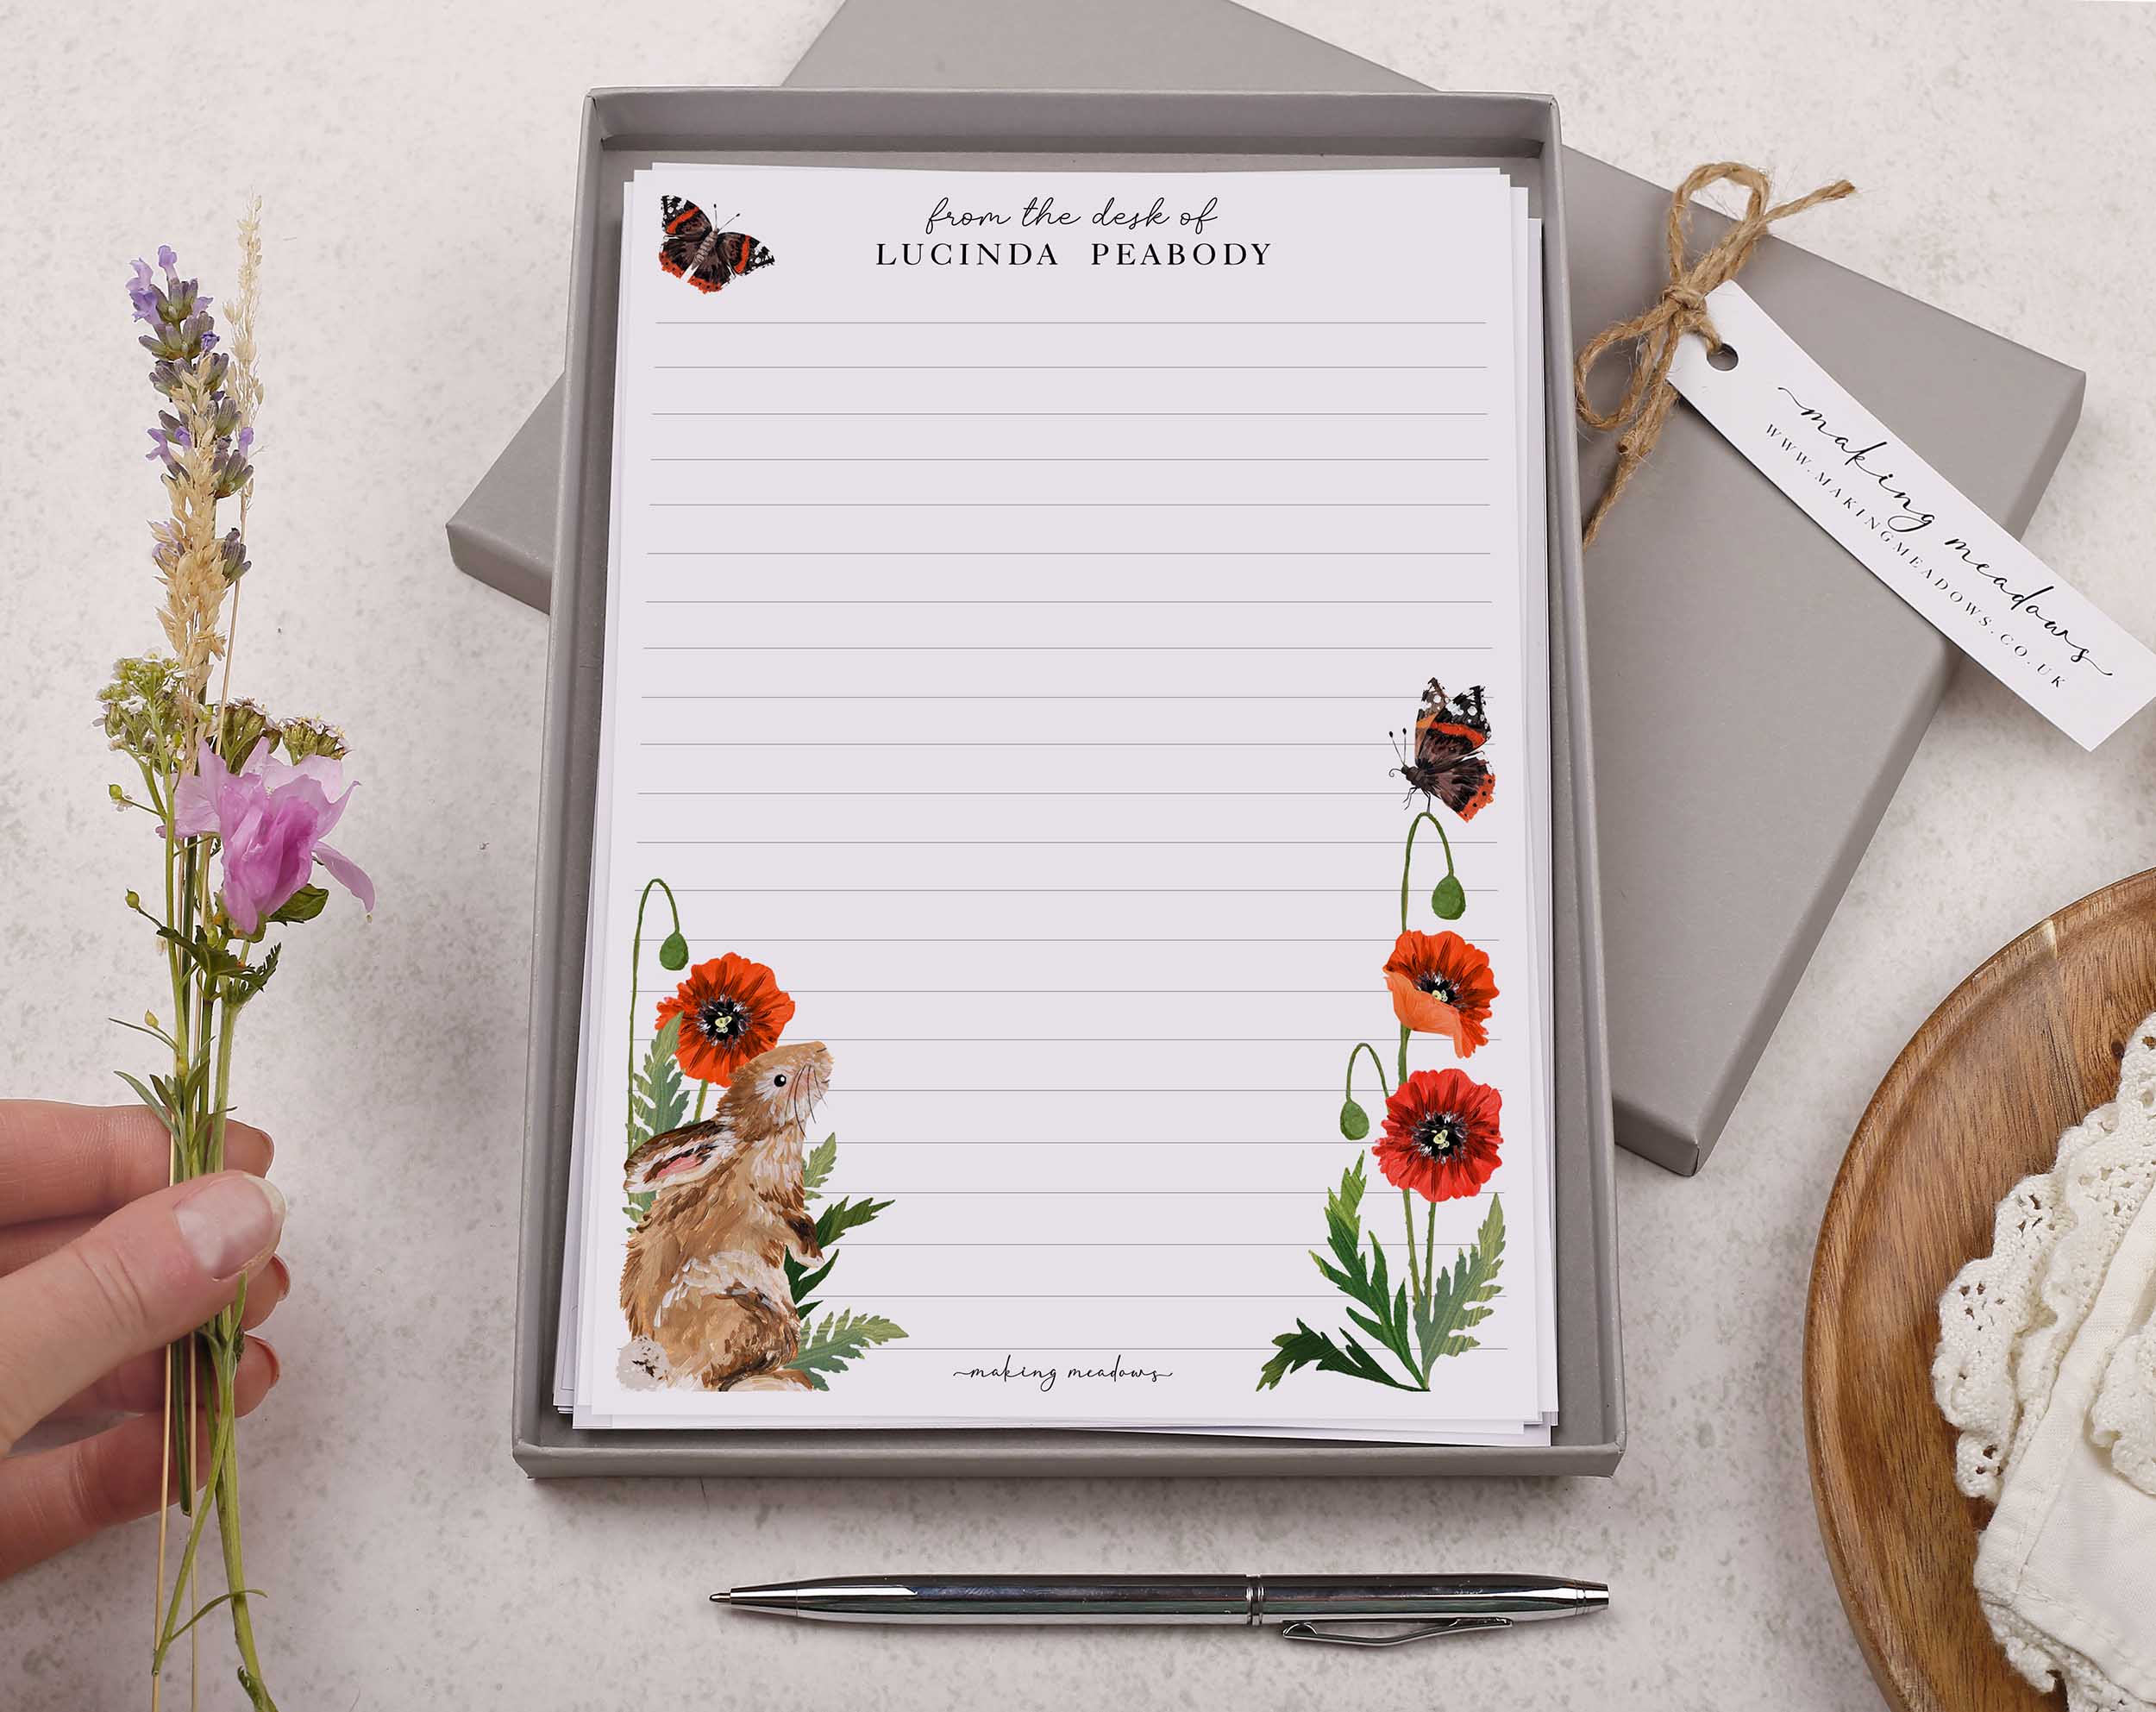 Premium personalised A5 letter writing paper set with a beautiful rabbit and poppy illustration scattered around the border of the letter paper sheets.